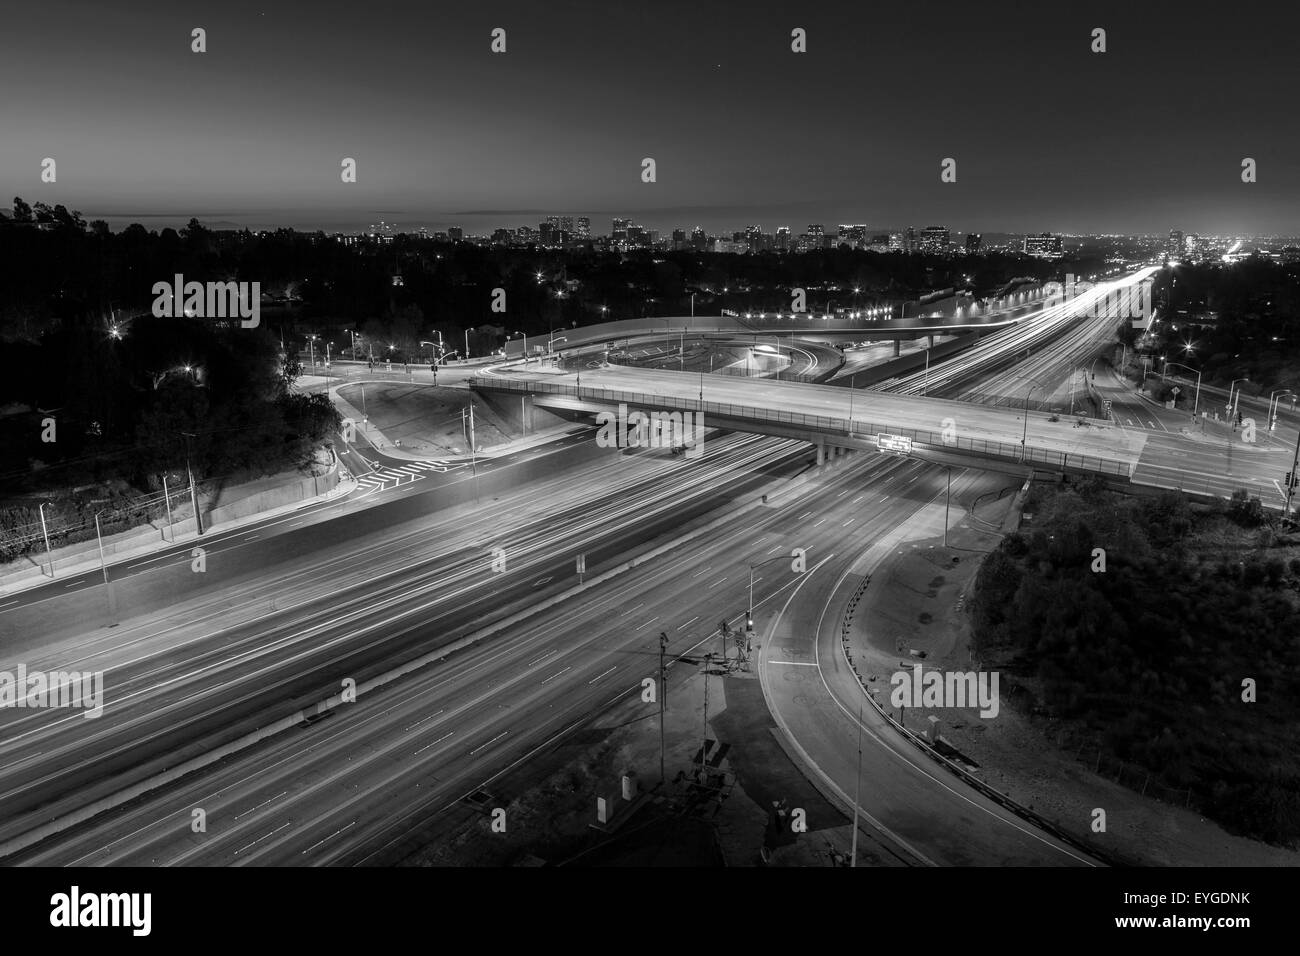 San Diego 405 Freeway black and white in Los Angeles, California. Stock Photo